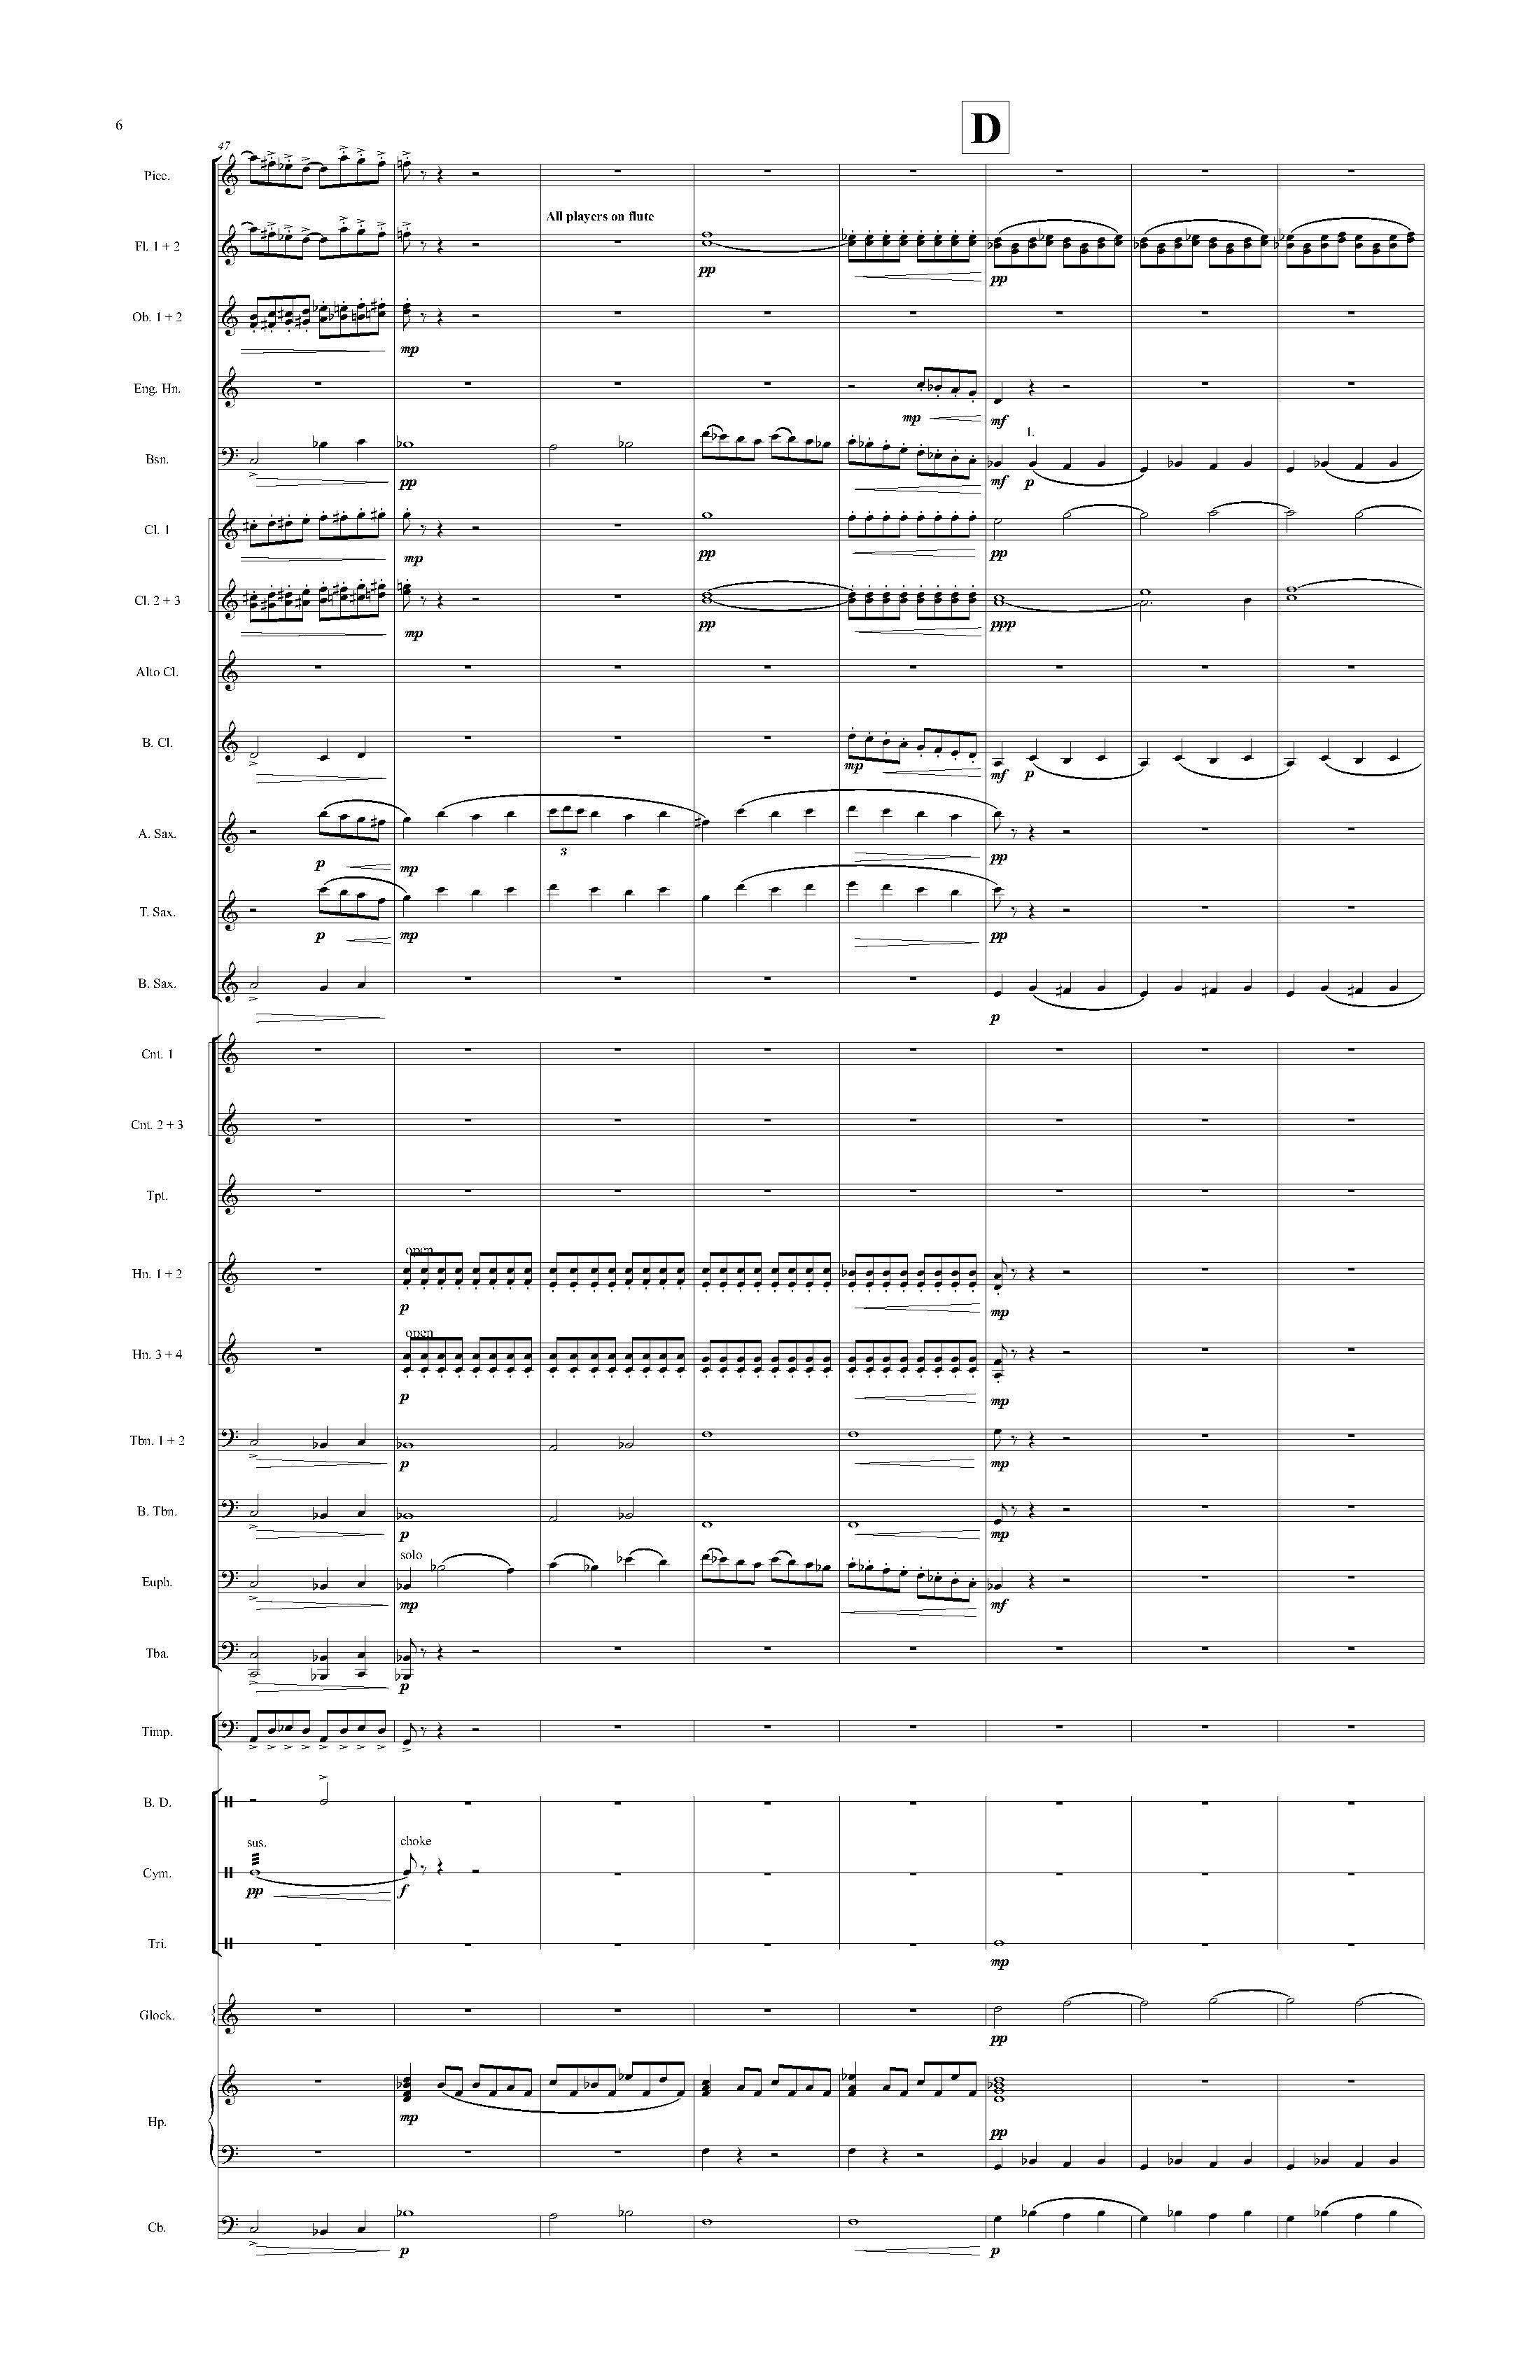 Psyche - Complete Score_Page_12.jpg